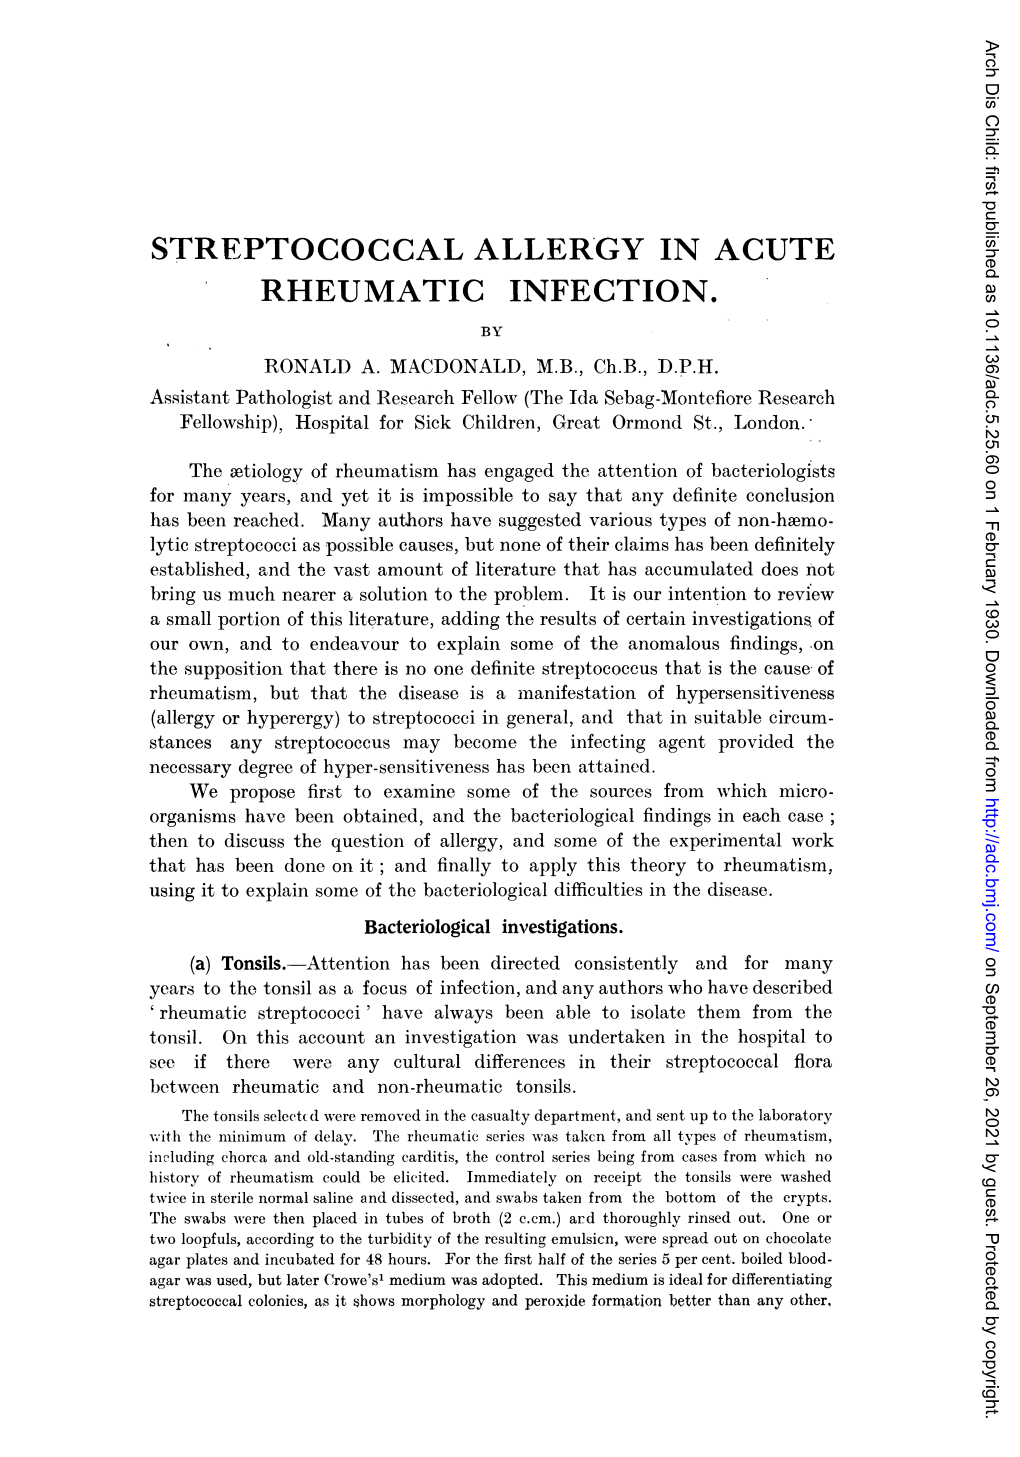 Streptococcal Allergy in Acute Rheumatic Infection. by Ronald A